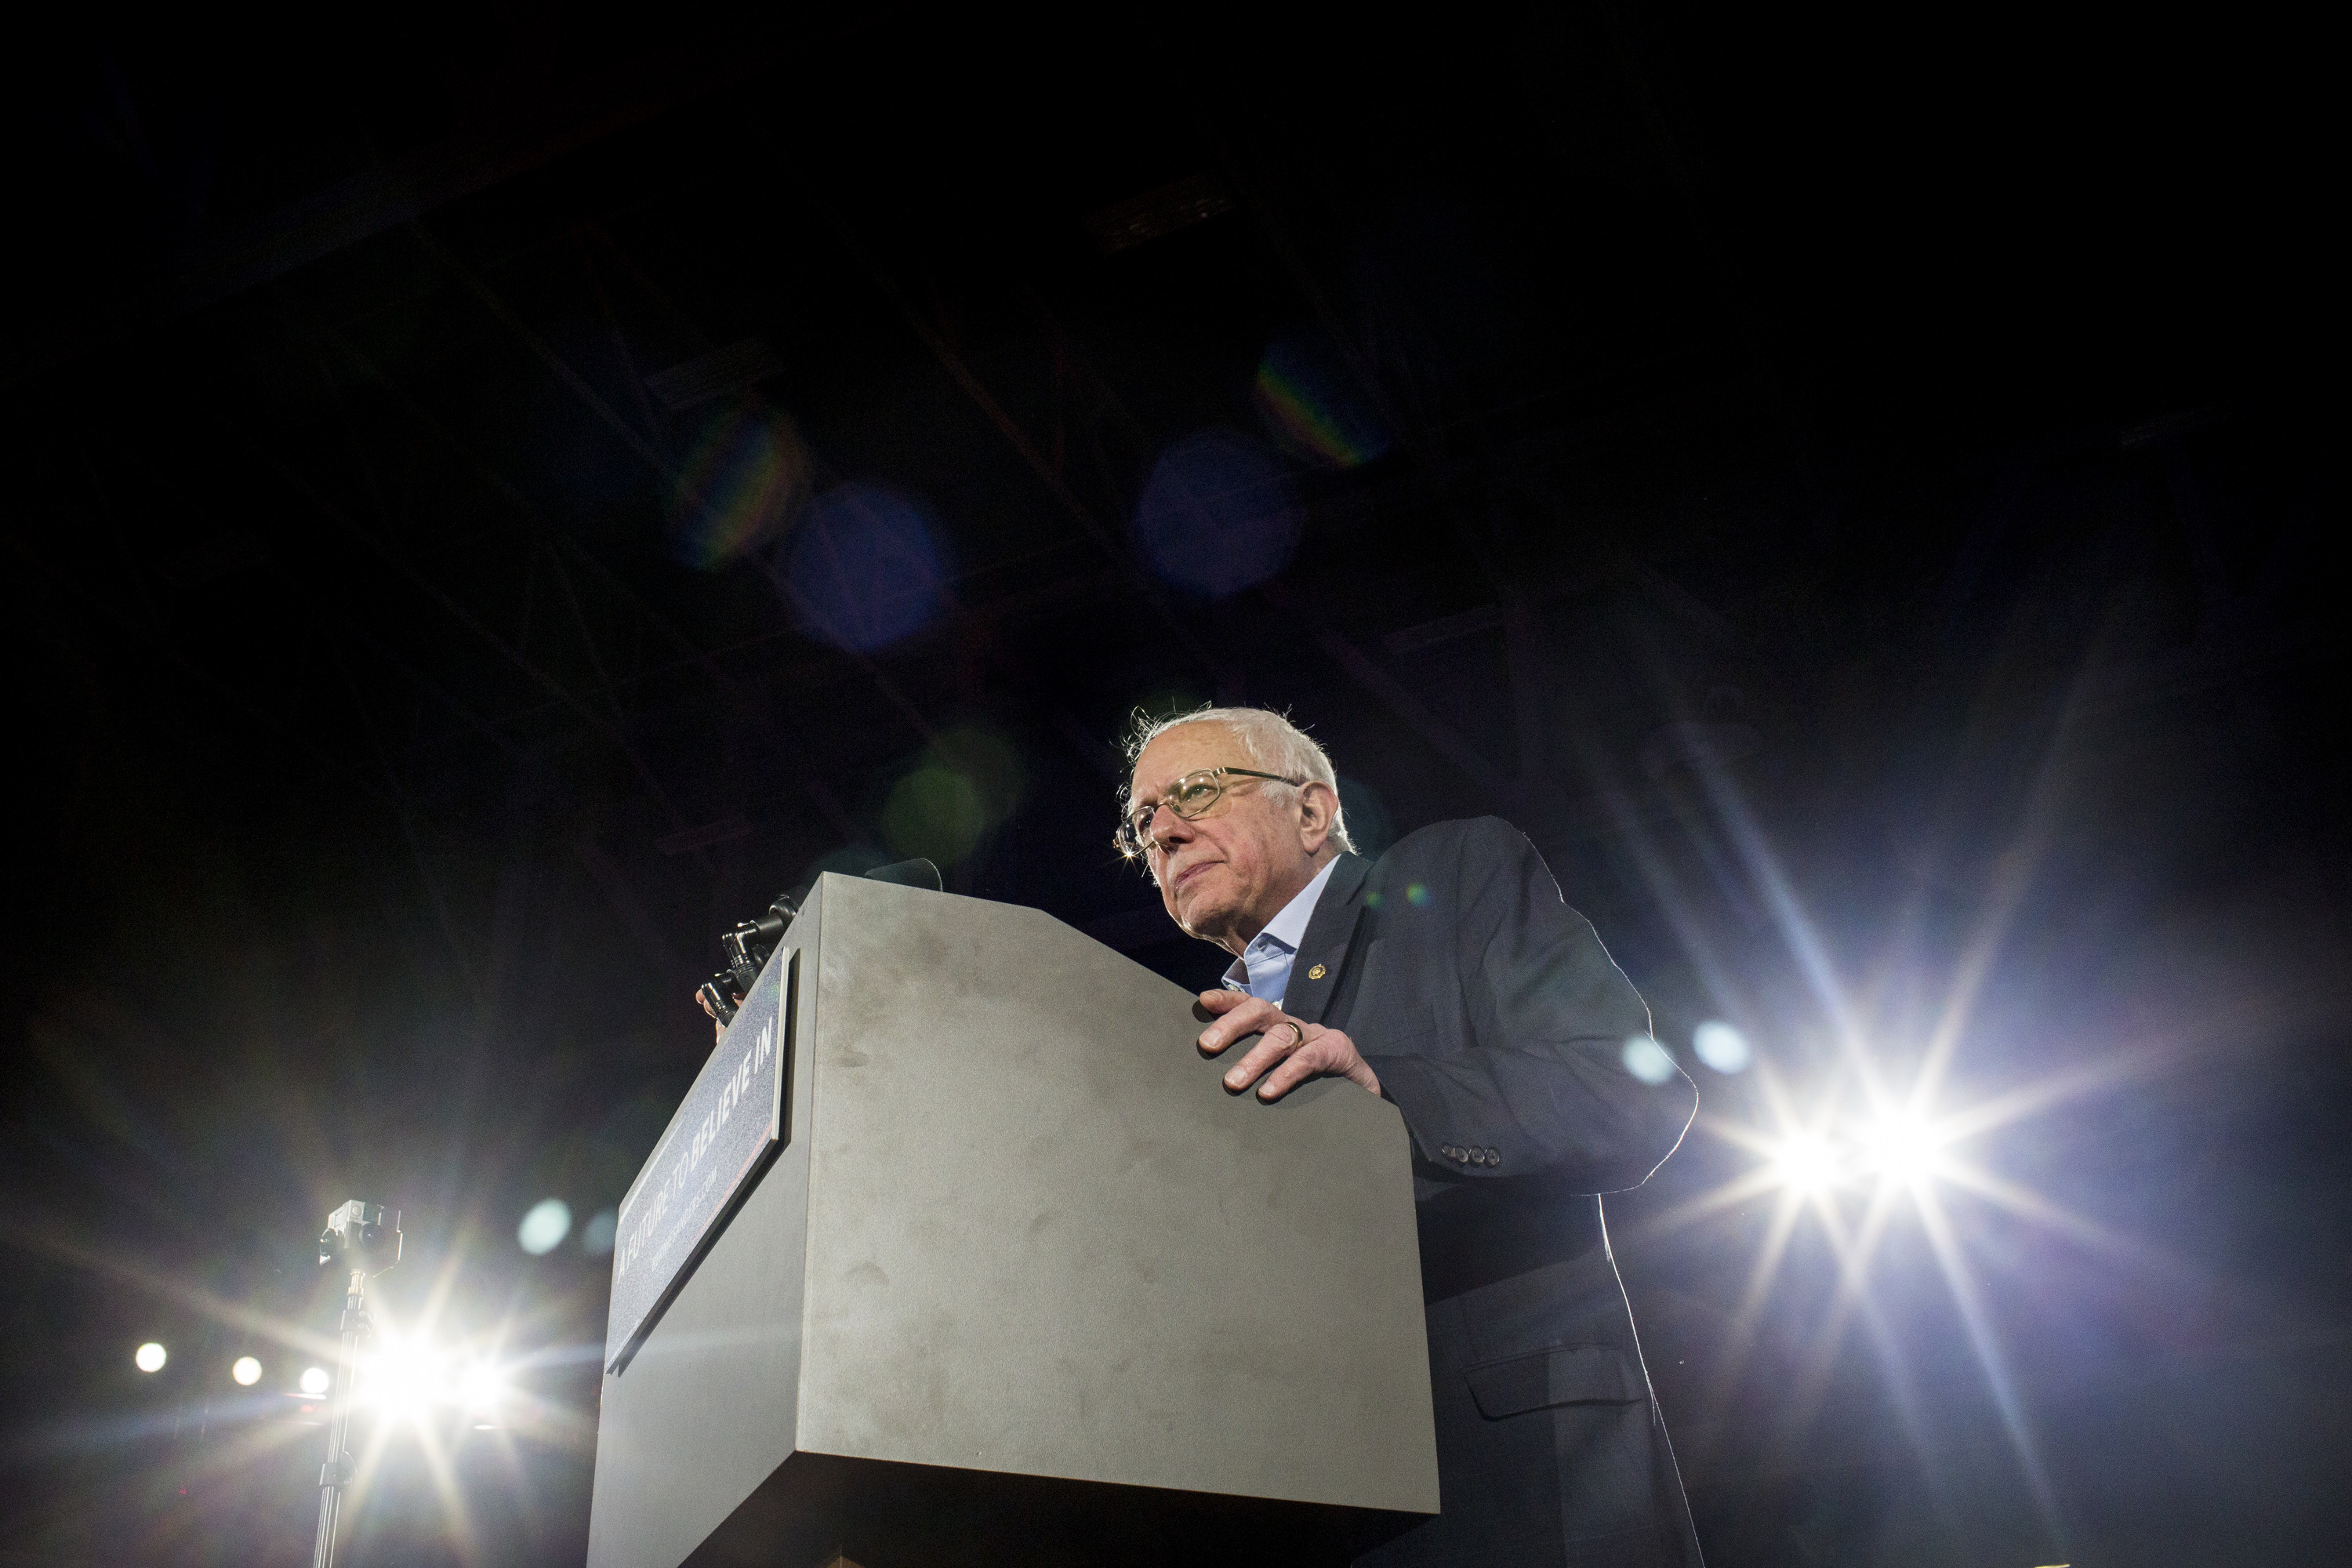 Bernie Sanders speaks to supporters at a campaign rally and concert in Iowa City, Iowa on Jan. 30, 2016. (Natalie Keyssar for TIME)